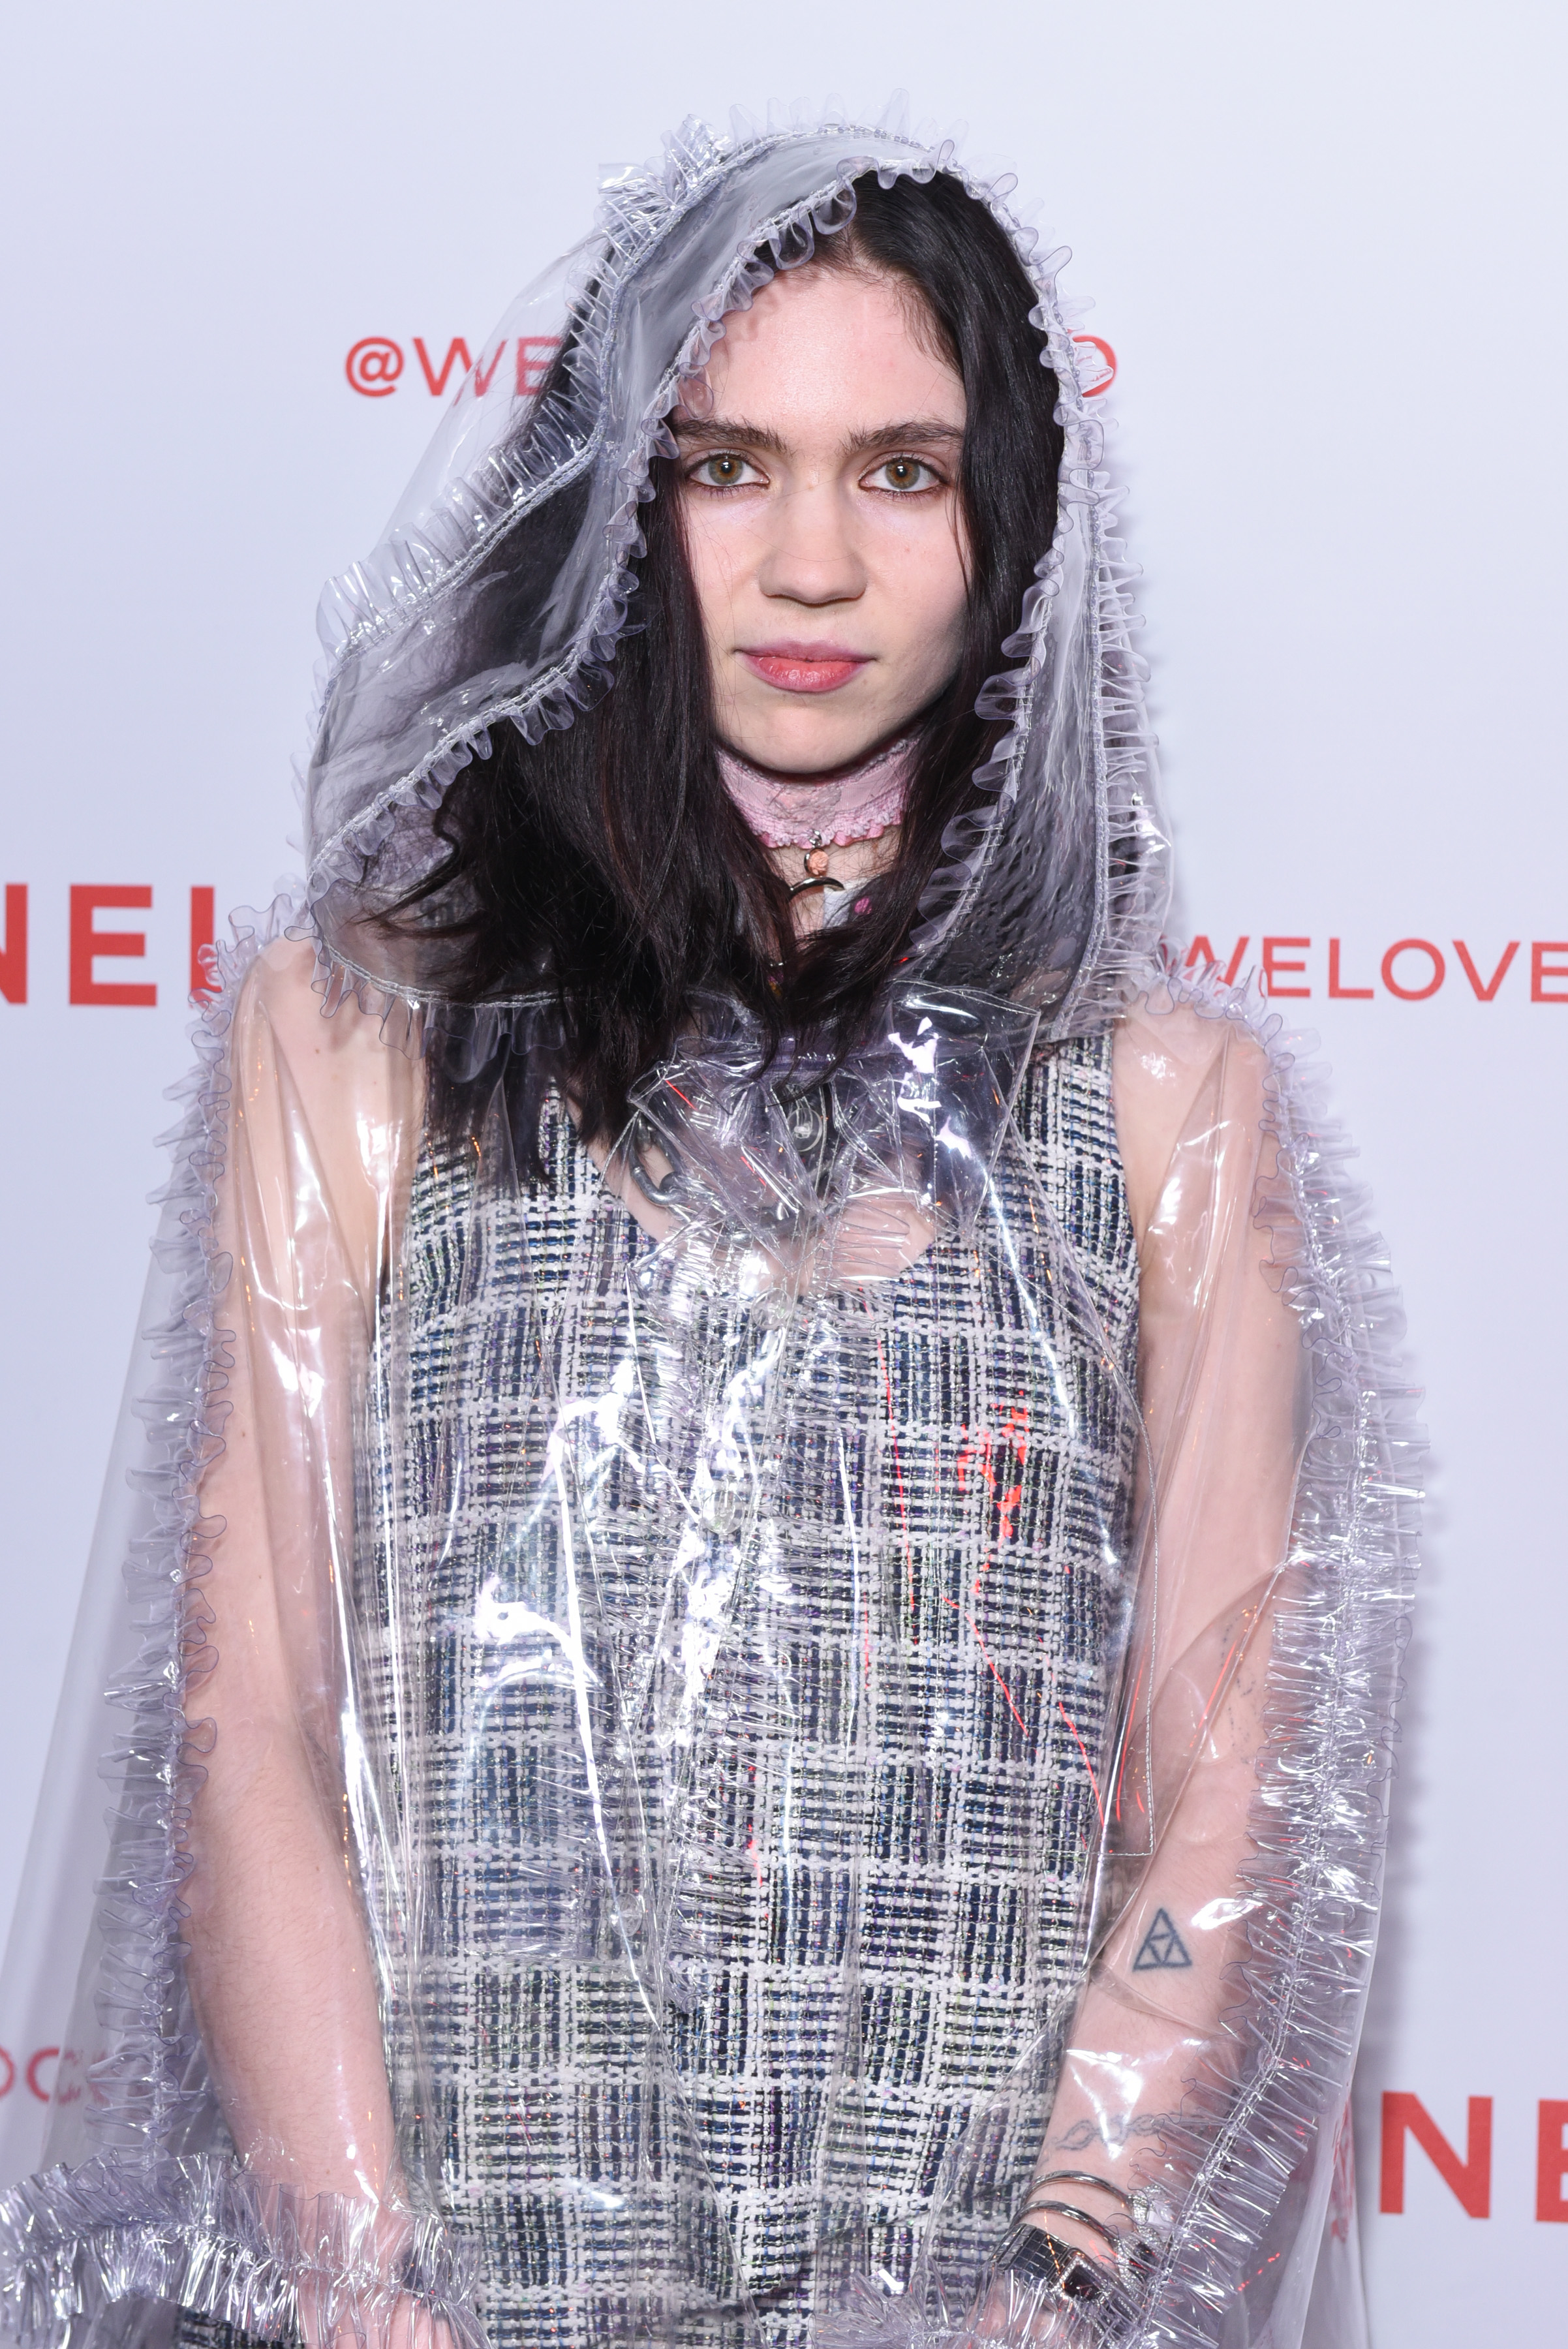 Grimes on the red carpet in a metallic dress and a transparesnt poncho/hooded coat